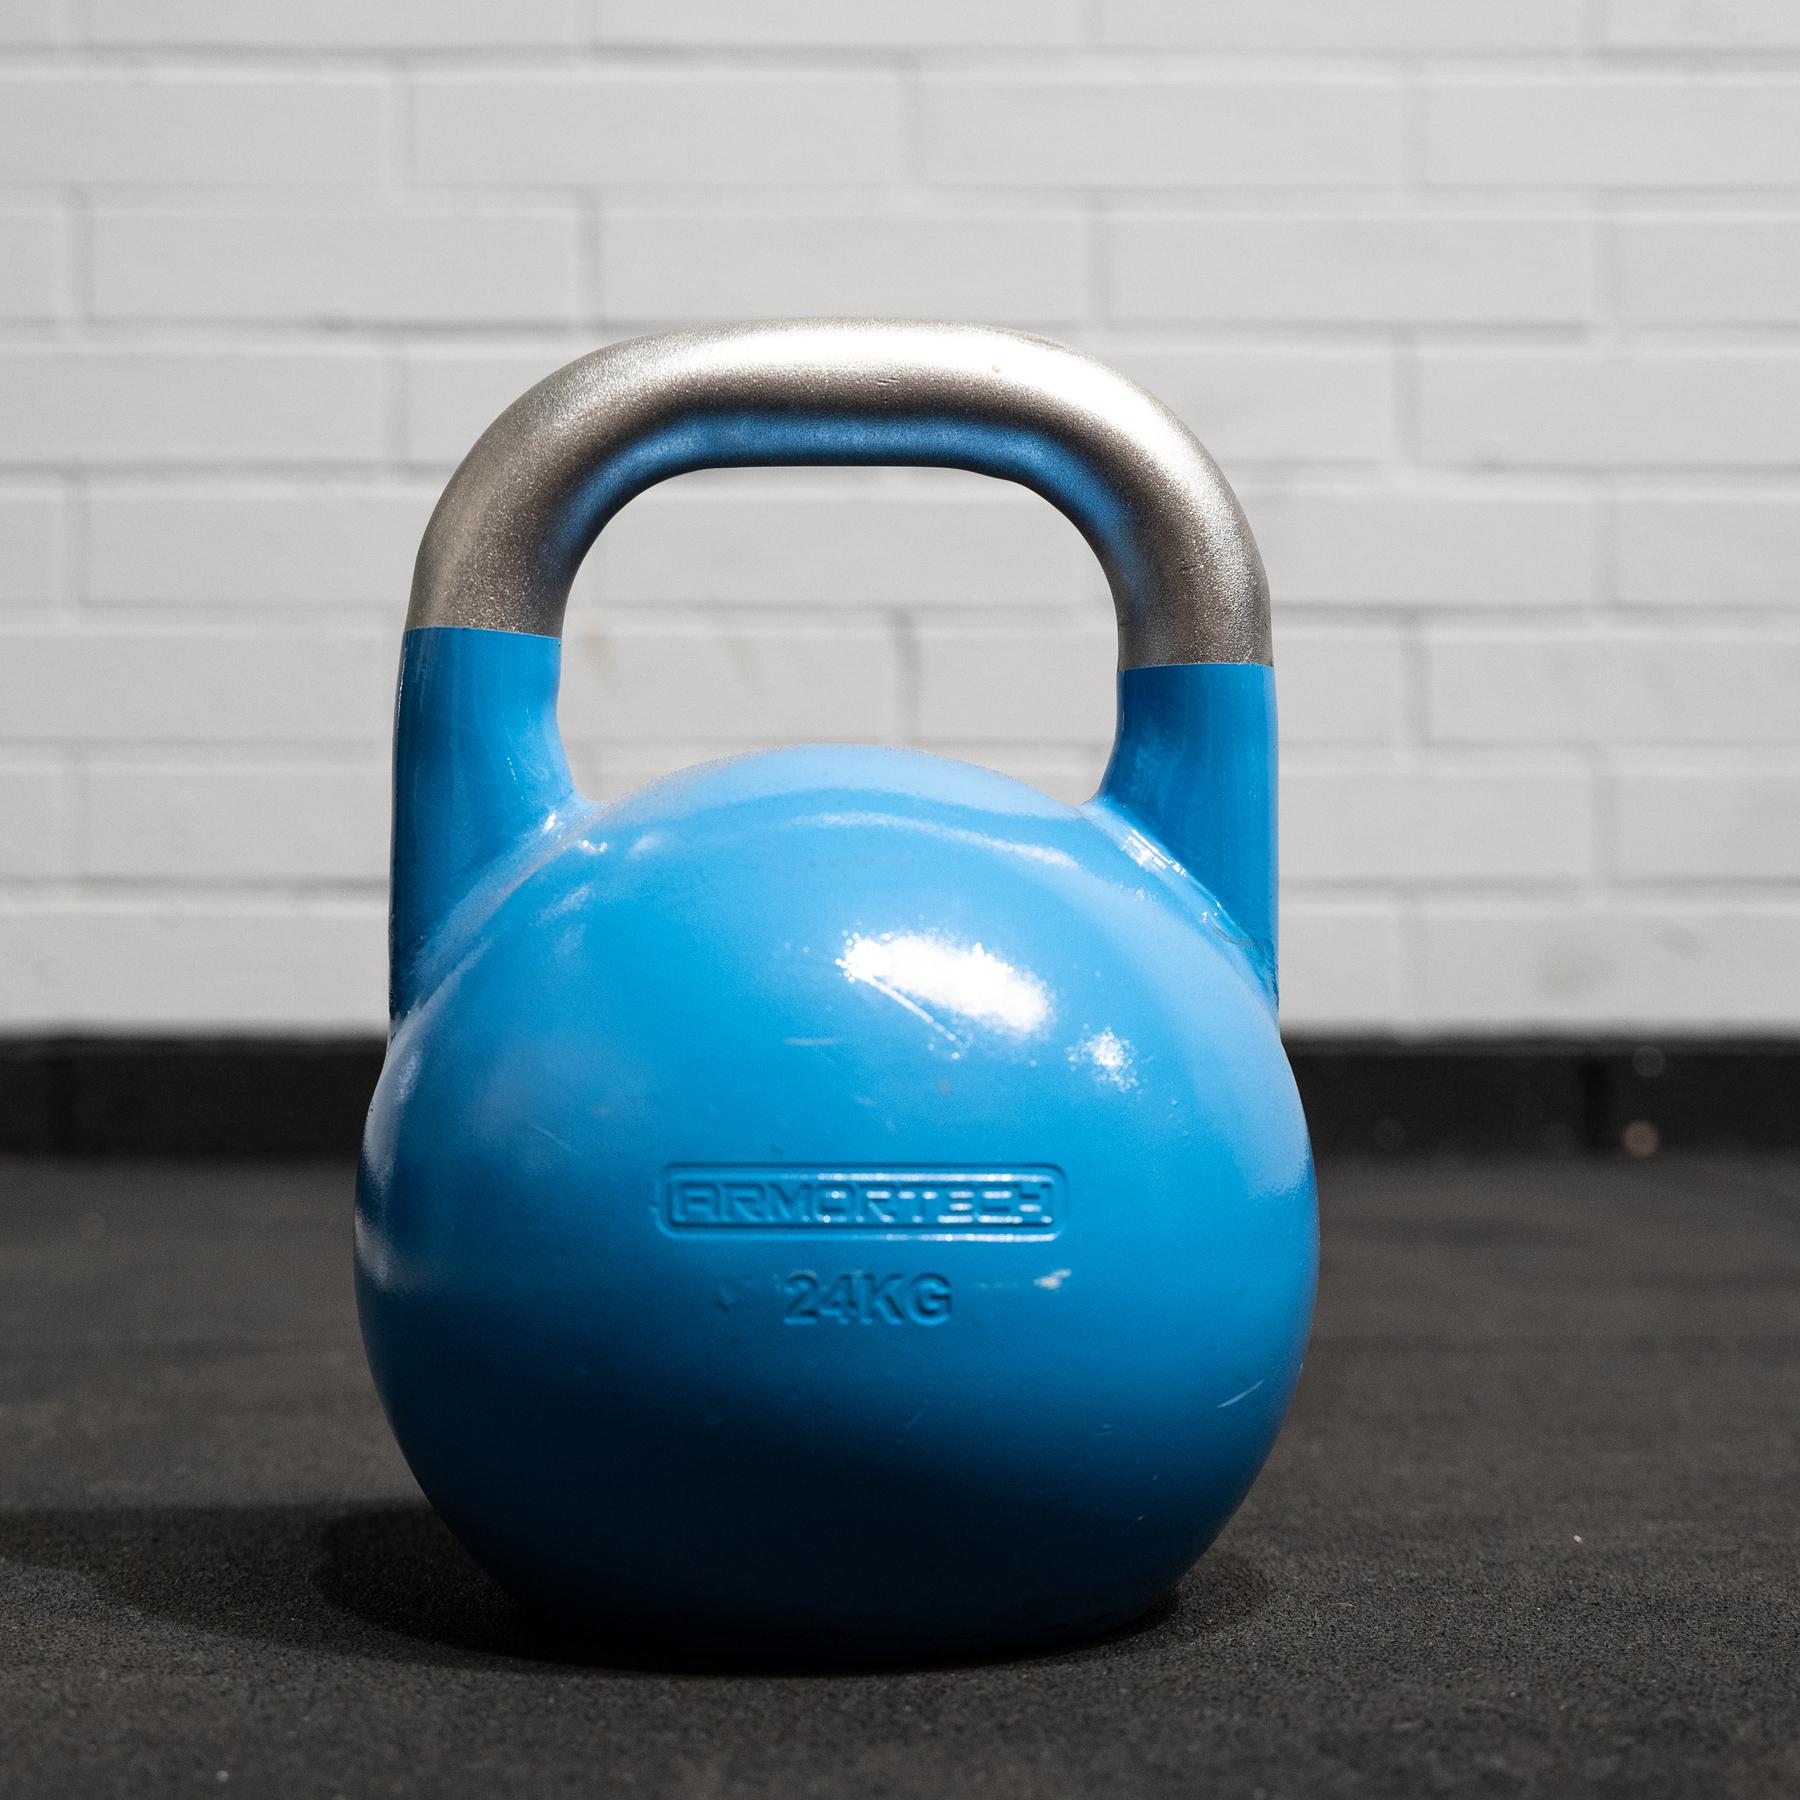 COMPETITION KETTLEBELL 24 kg, Color